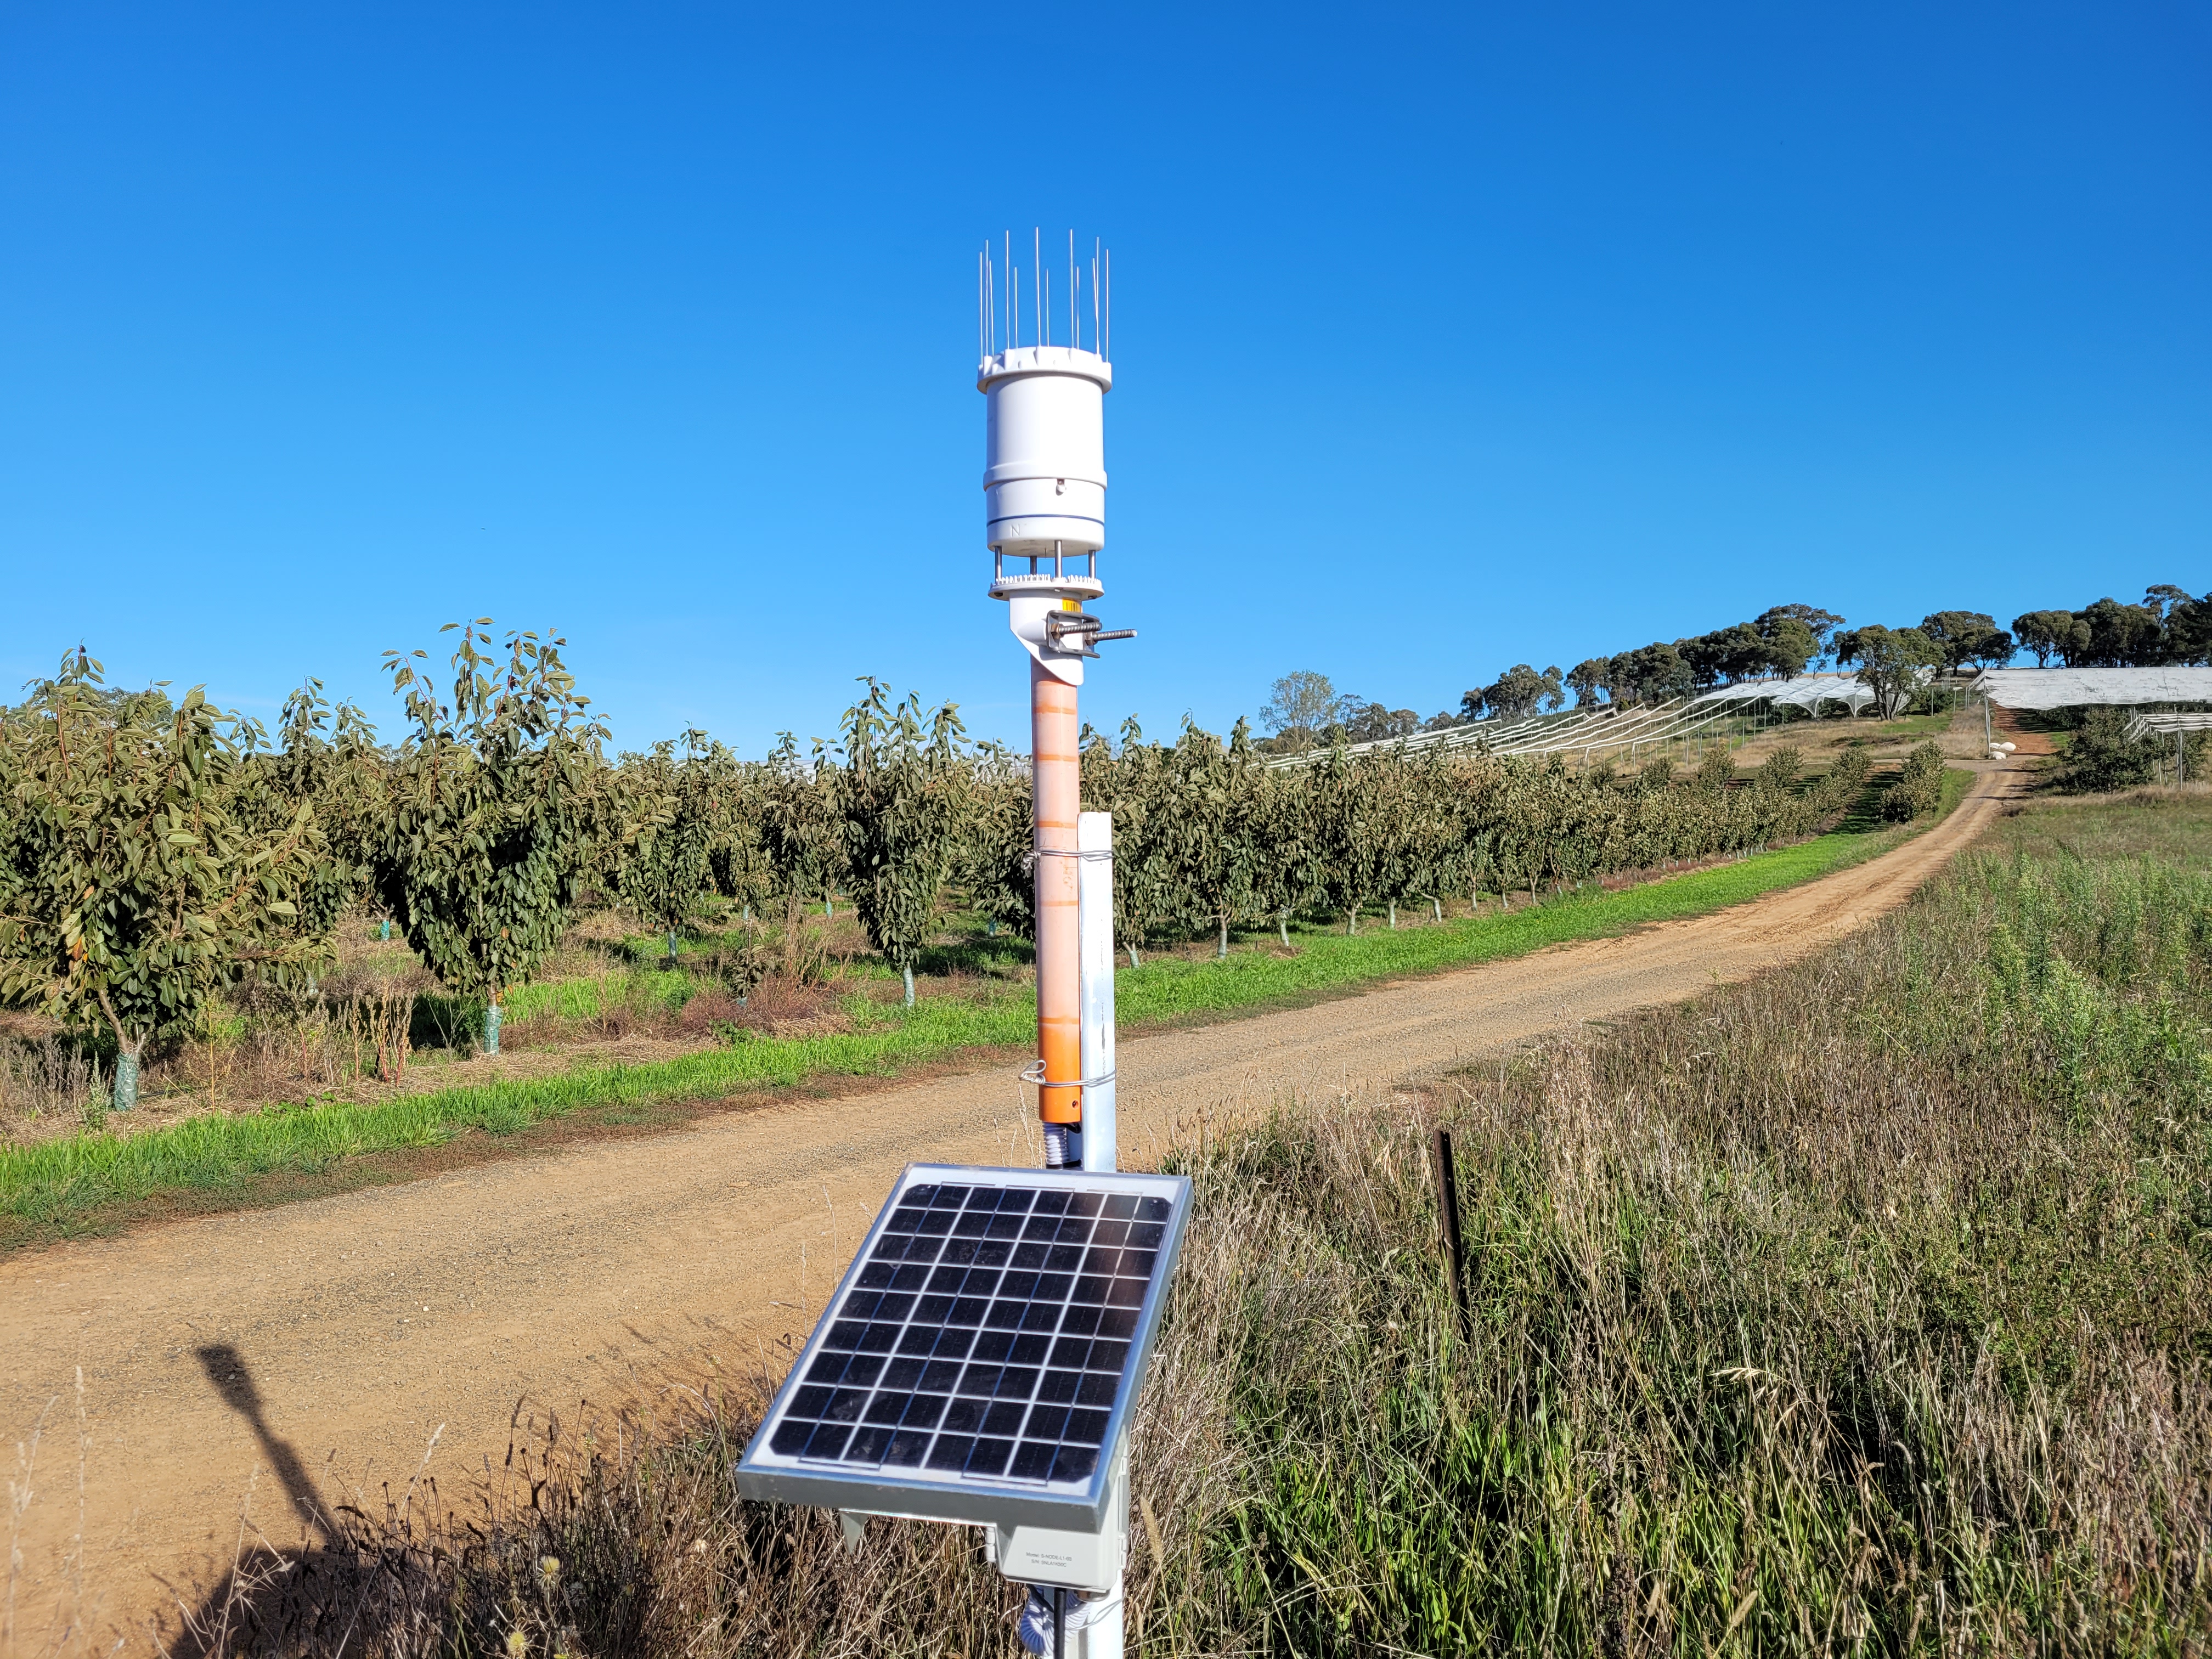 Benefits of on-farm weather stations on orchards in NSW